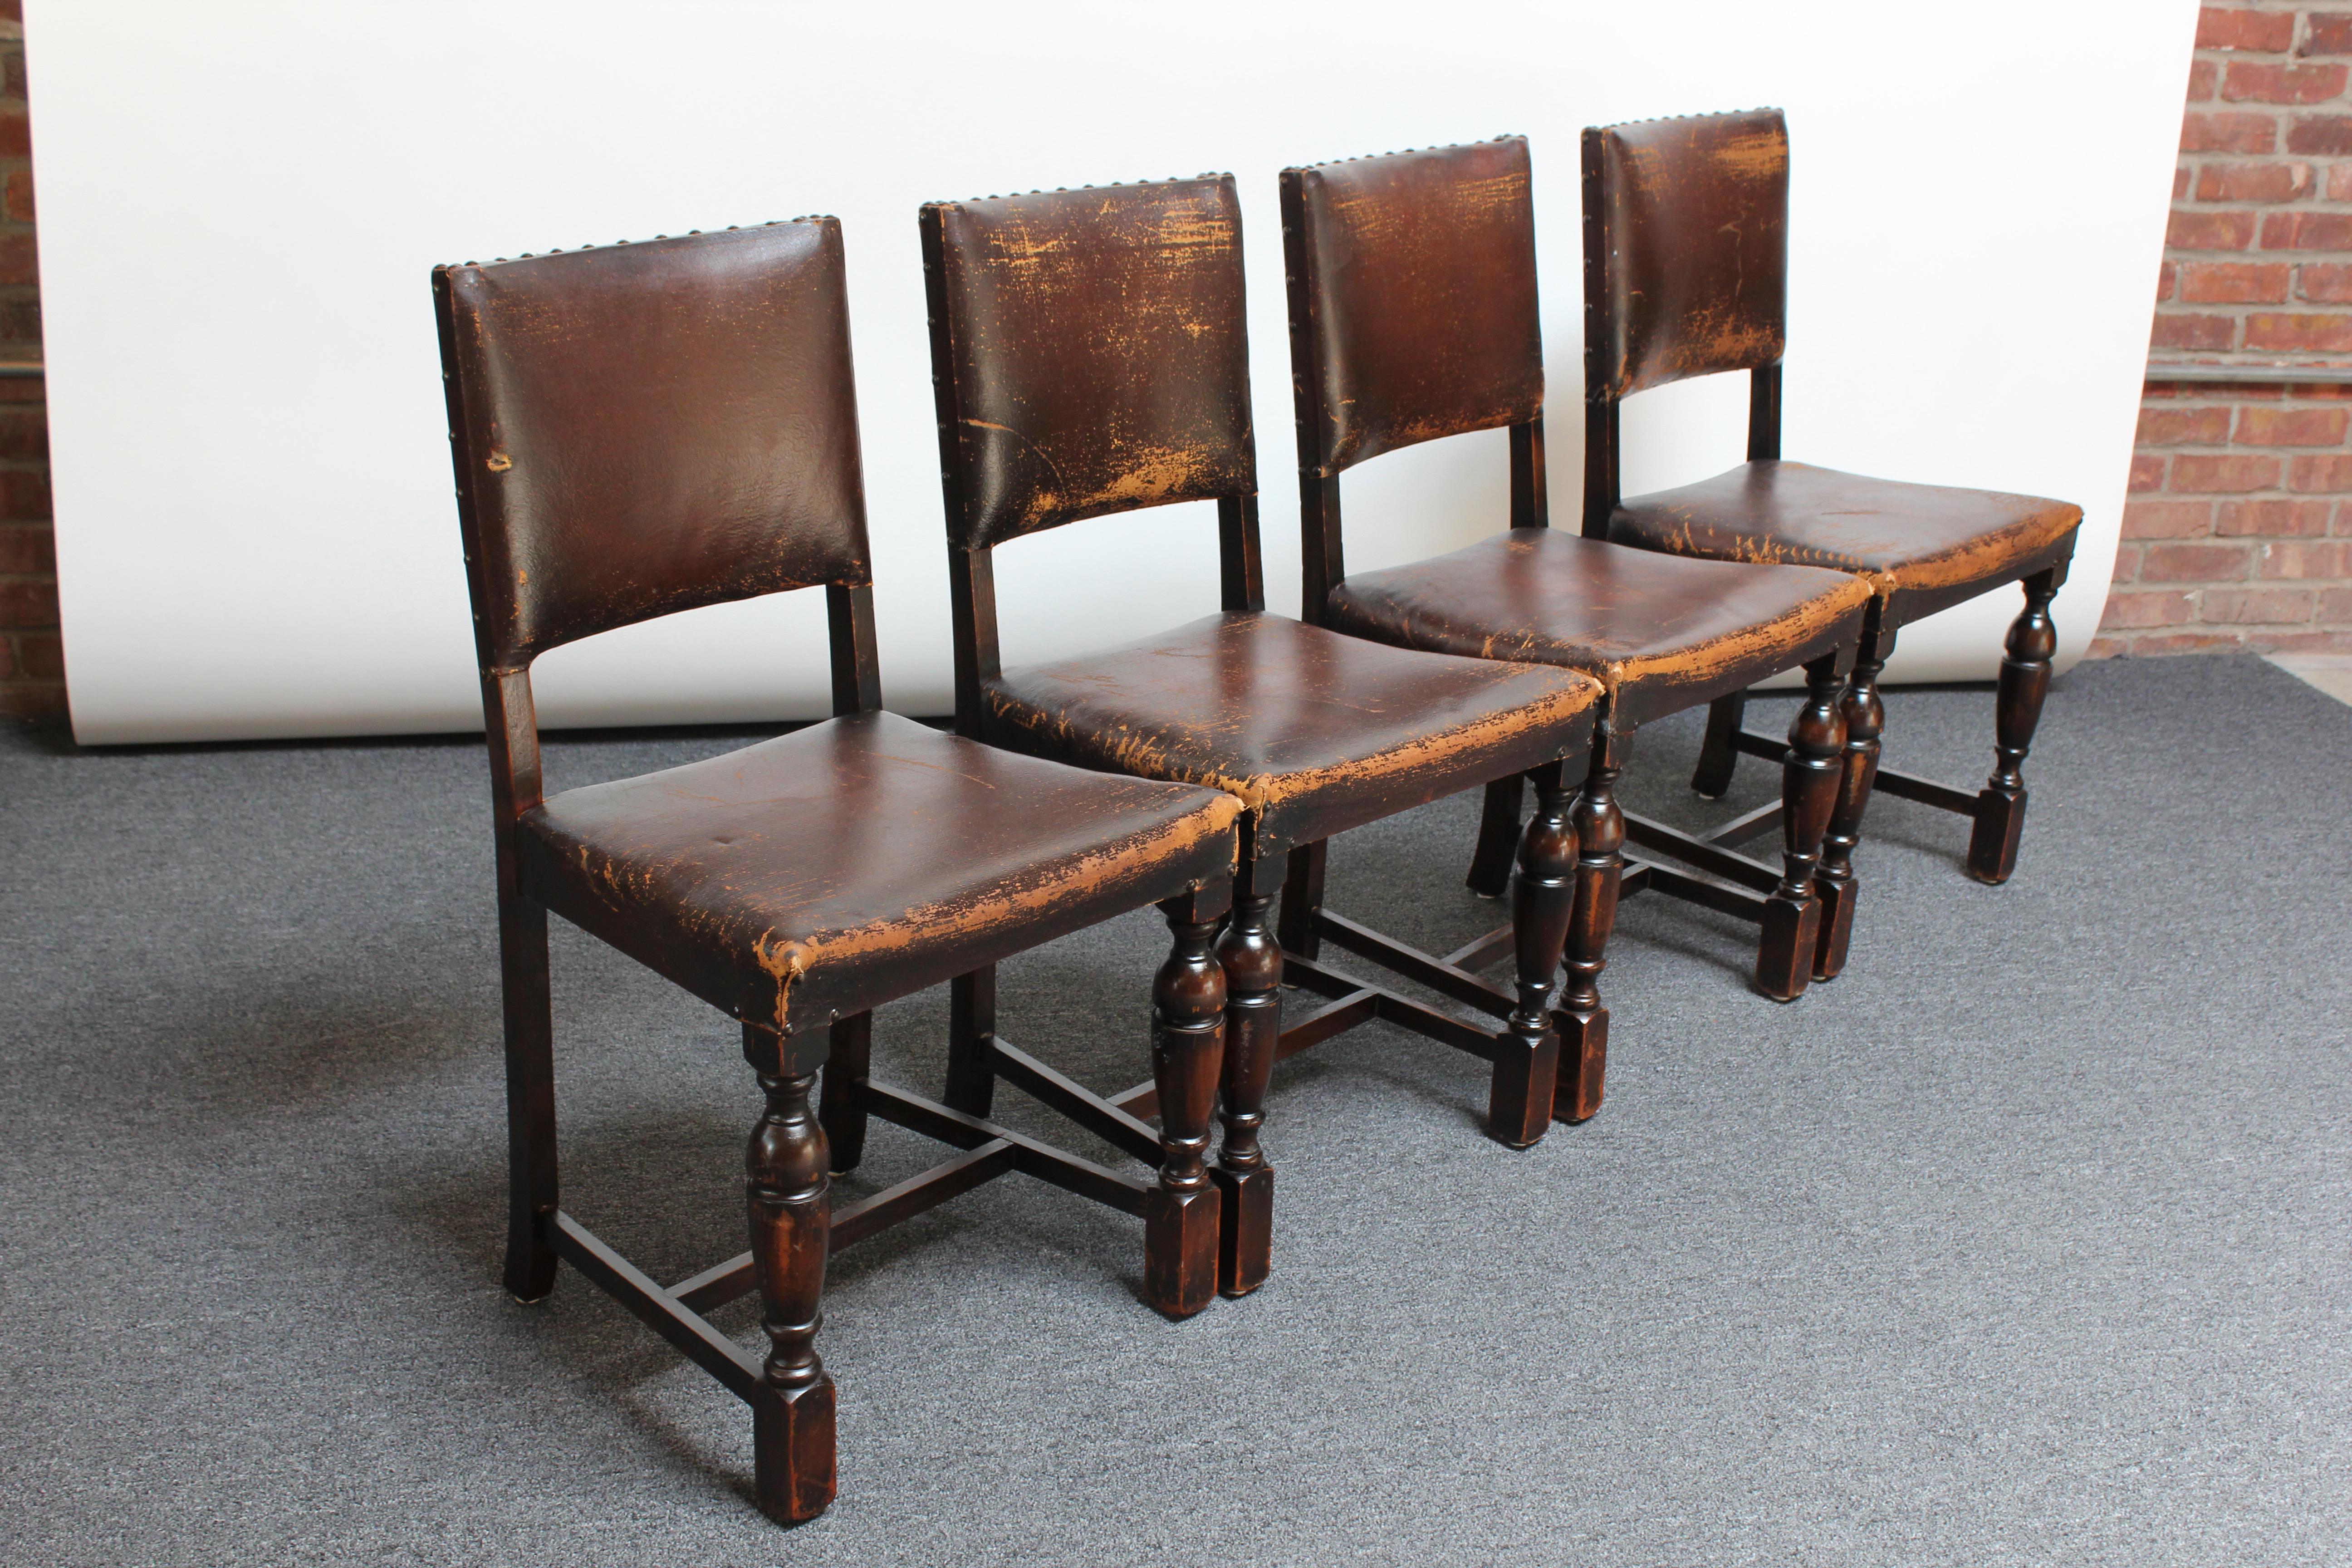 Set of four Spanish Revival hacienda dining or accent chairs (ca. 1930s, Spain). Features leather back and seat rests with mahogany frames and nailhead / stud detail. 
Warm patina / signs of use (scuffs / corner losses to the leather along with one